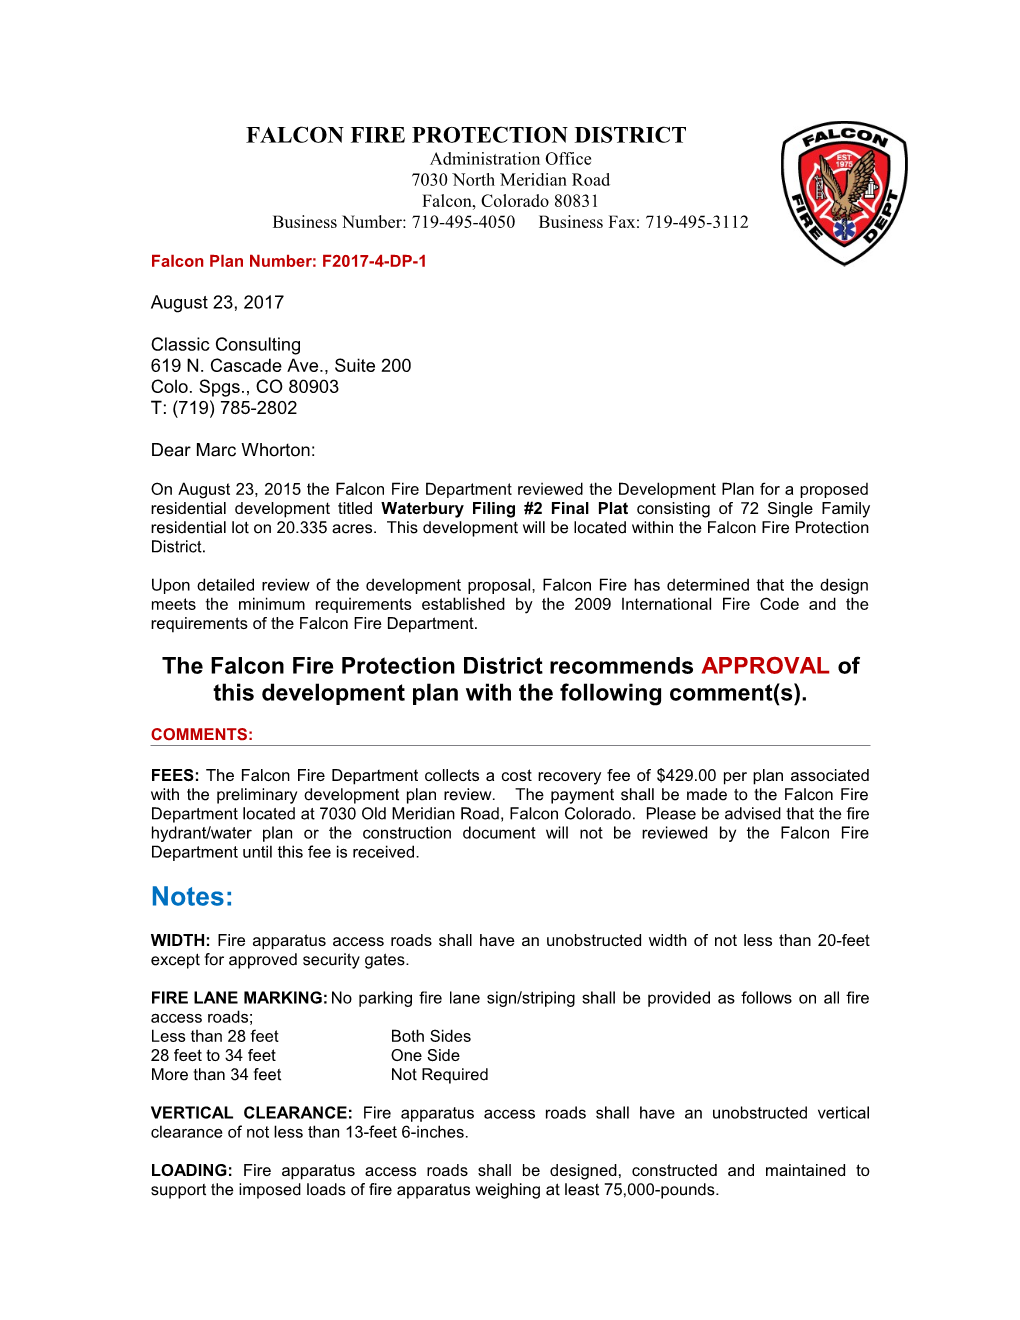 Falcon Fire Protection District